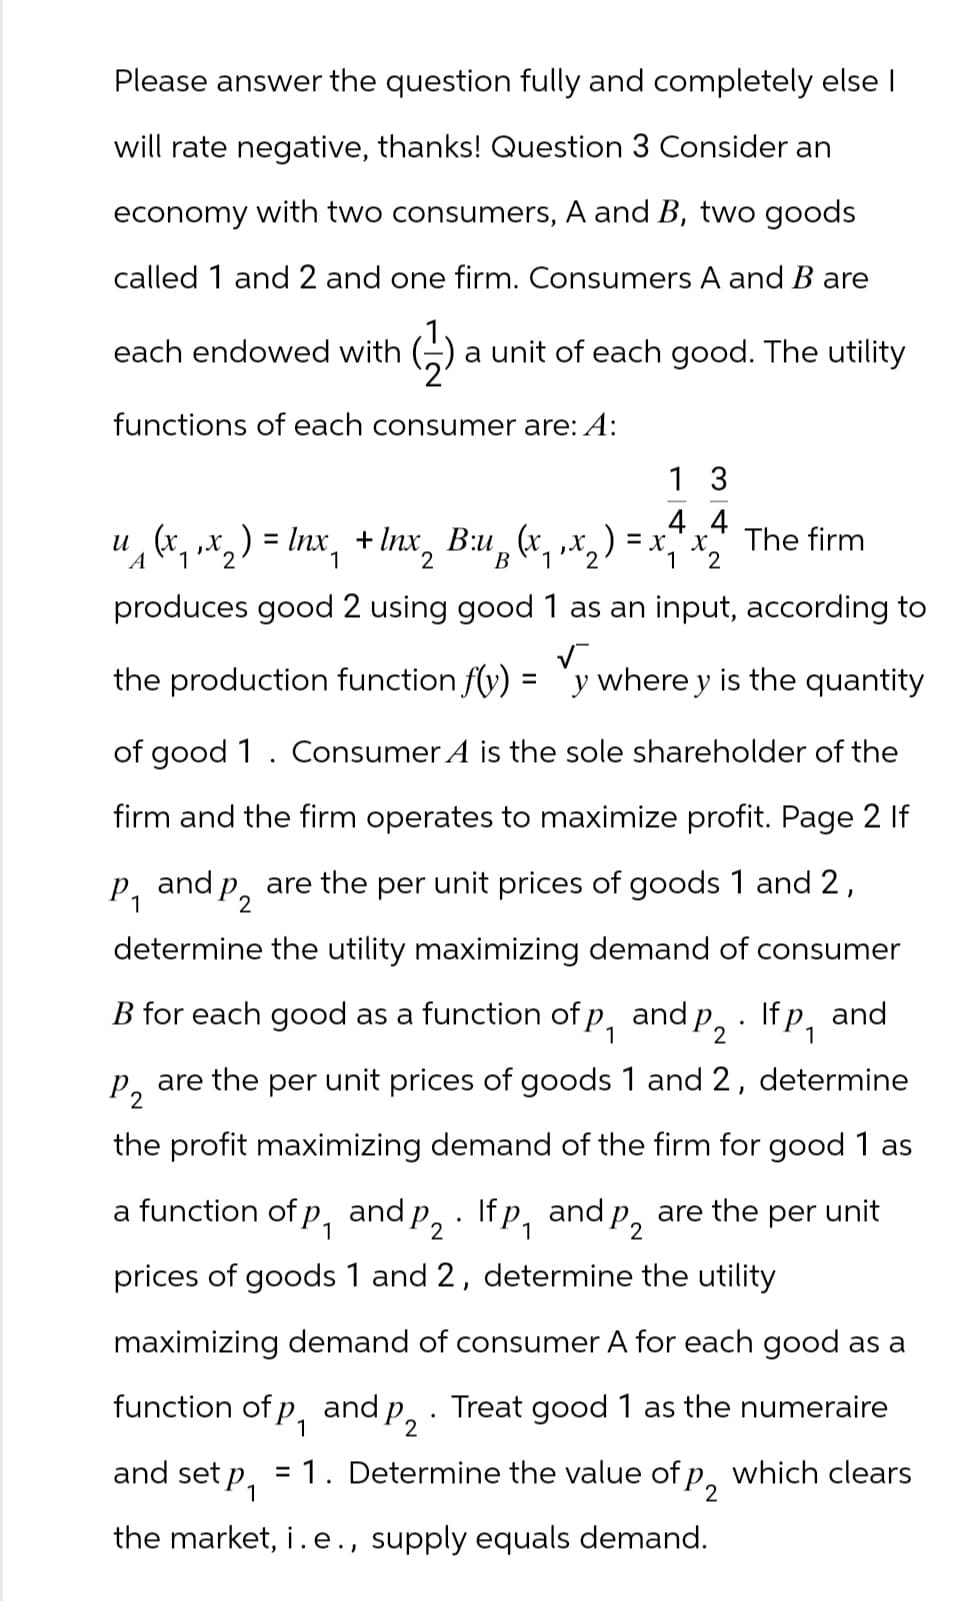 Please answer the question fully and completely else I
will rate negative, thanks! Question 3 Consider an
economy with two consumers, A and B, two goods
called 1 and 2 and one firm. Consumers A and B are
each endowed with a unit of each good. The utility
functions of each consumer are: A:
13
4 4
u (x₁‚x2 ) = lnx₁ + Inx2 B:u ₁₂ (x, ‚ x 2 ) = x, x 2
The firm
B 1
A
1
1 2
produces good 2 using good 1 as an input, according to
the production function f(y)
=
y where y is the quantity
of good 1. Consumer A is the sole shareholder of the
firm and the firm operates to maximize profit. Page 2 If
P₁
and P2
determine the utility maximizing demand of consumer
are the per unit prices of goods 1 and 2,
.
B for each good as a function of p, and P2 · If P₁
P 2
1
and
are the per unit prices of goods 1 and 2, determine
the profit maximizing demand of the firm for good 1 as
a function of p₁ and p2. Ifp, and p2 are the per unit
1
prices of goods 1 and 2, determine the utility
maximizing demand of consumer A for each good as a
function of p₁ and P2. Treat good 1 as the numeraire
and set P₁
1
= 1. Determine the value of p2
the market, i. e., supply equals demand.
which clears